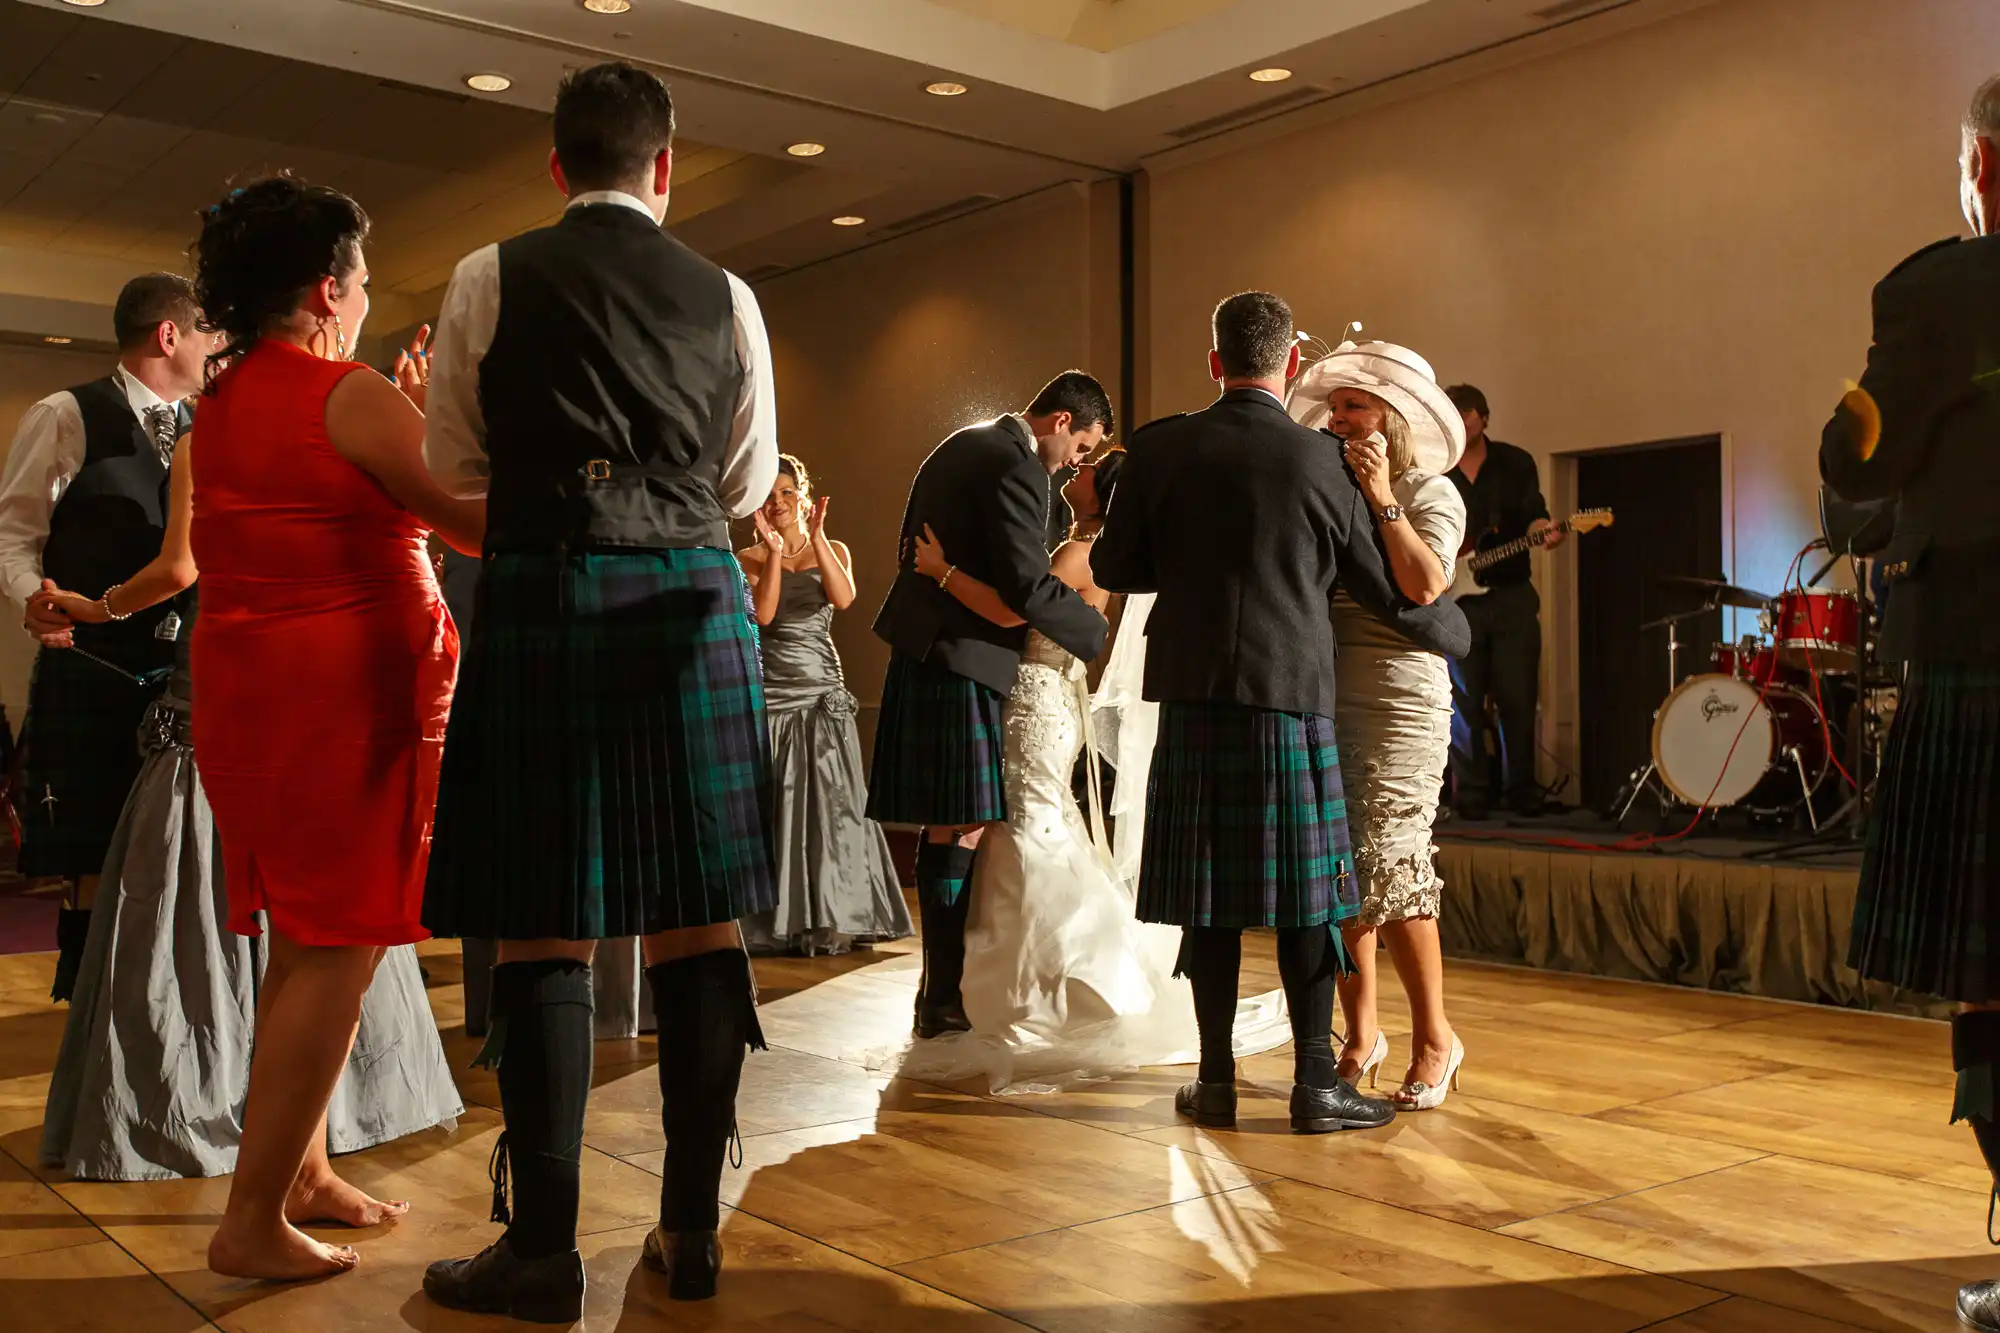 People in formal attire, including kilts, dance closely at a warmly lit indoor event with a live band in the background.